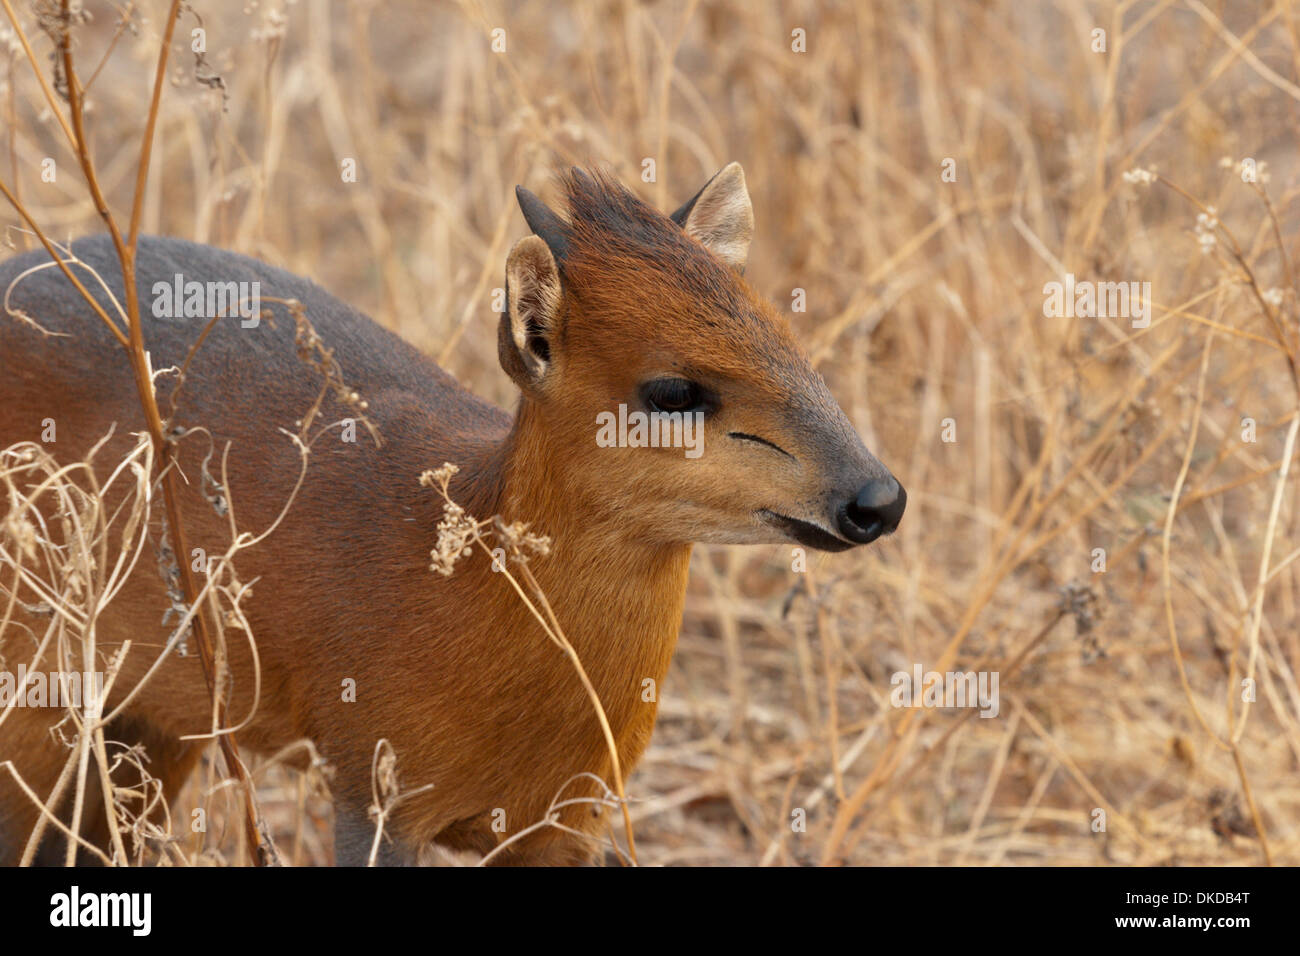 red forest duiker small deer like antelope Africa Guinea Stock Photo